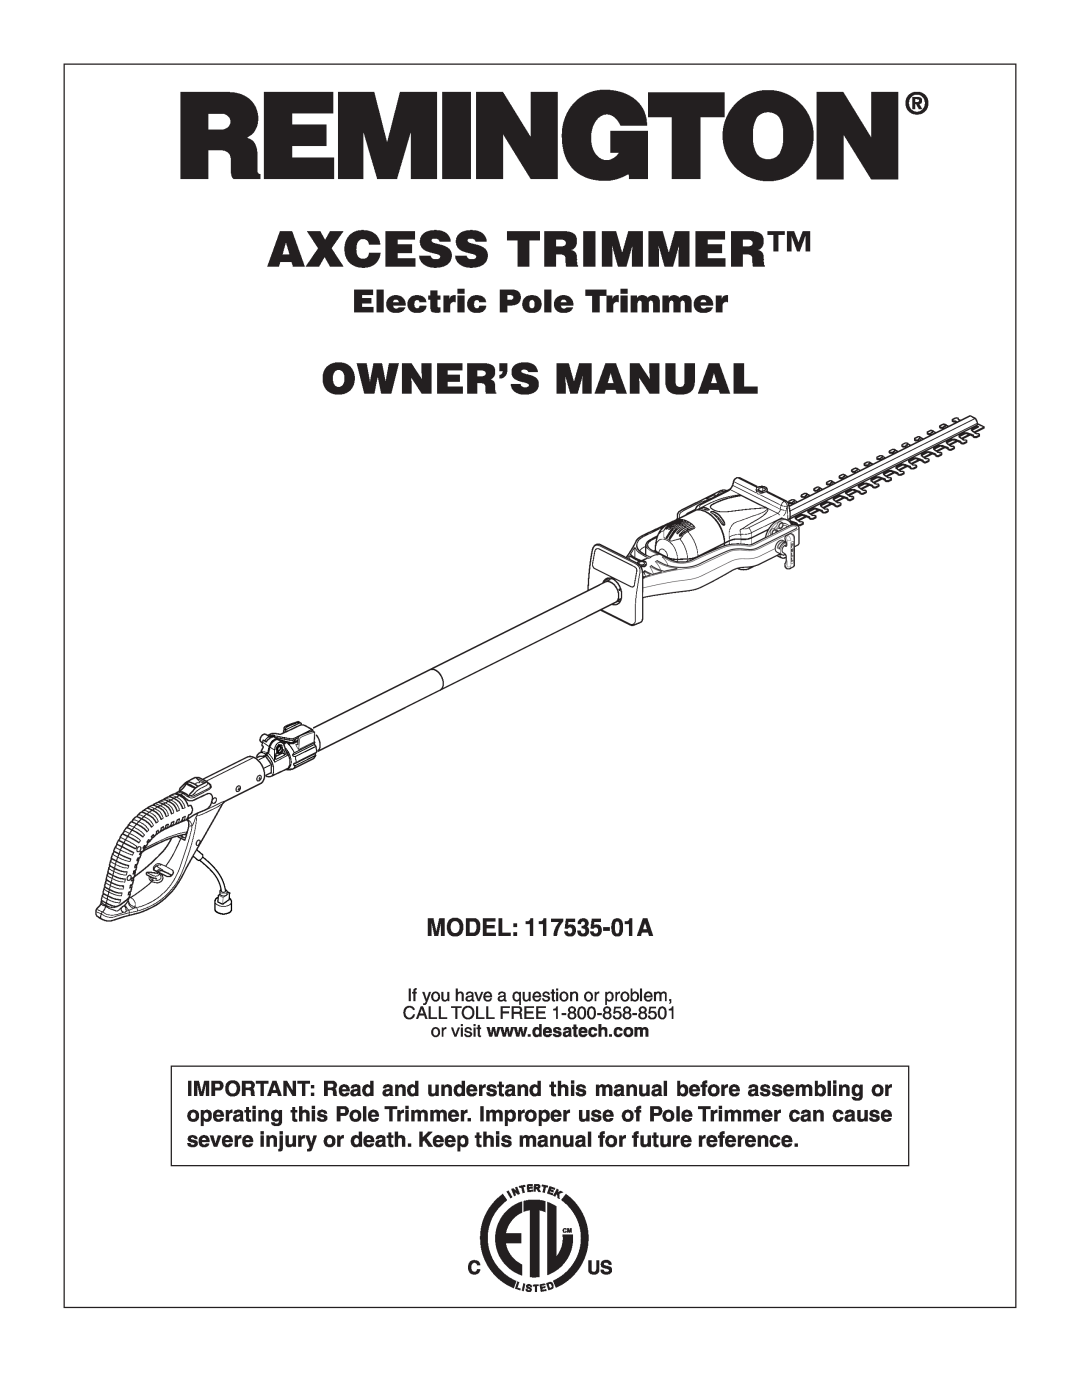 Remington Power Tools owner manual Axcess Trimmer, Owner’S Manual, Electric Pole Trimmer, MODEL 117535-01A 